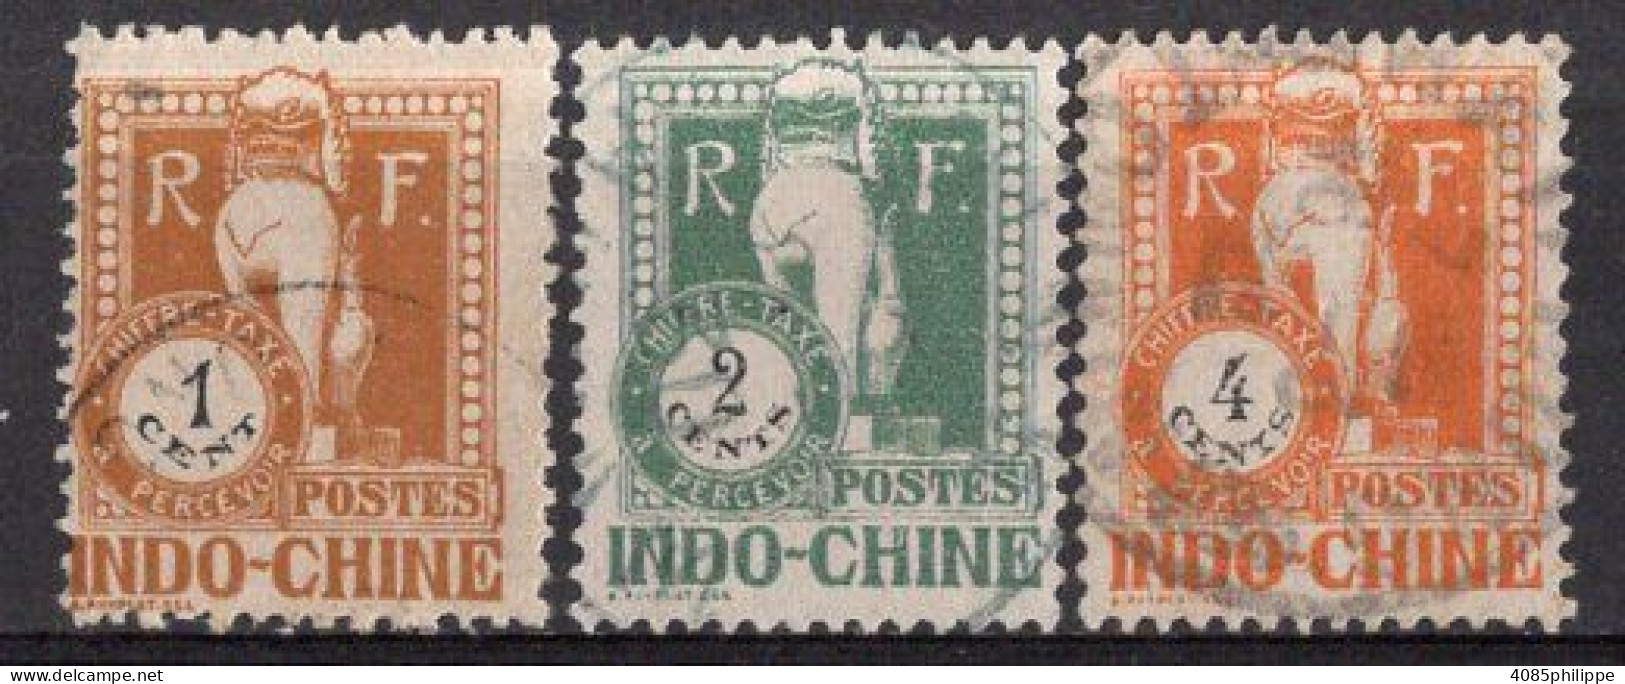 INDOCHINE Timbres-Taxe N°33, 34 & 36 Oblitérés TB Cote : 1€75 - Timbres-taxe